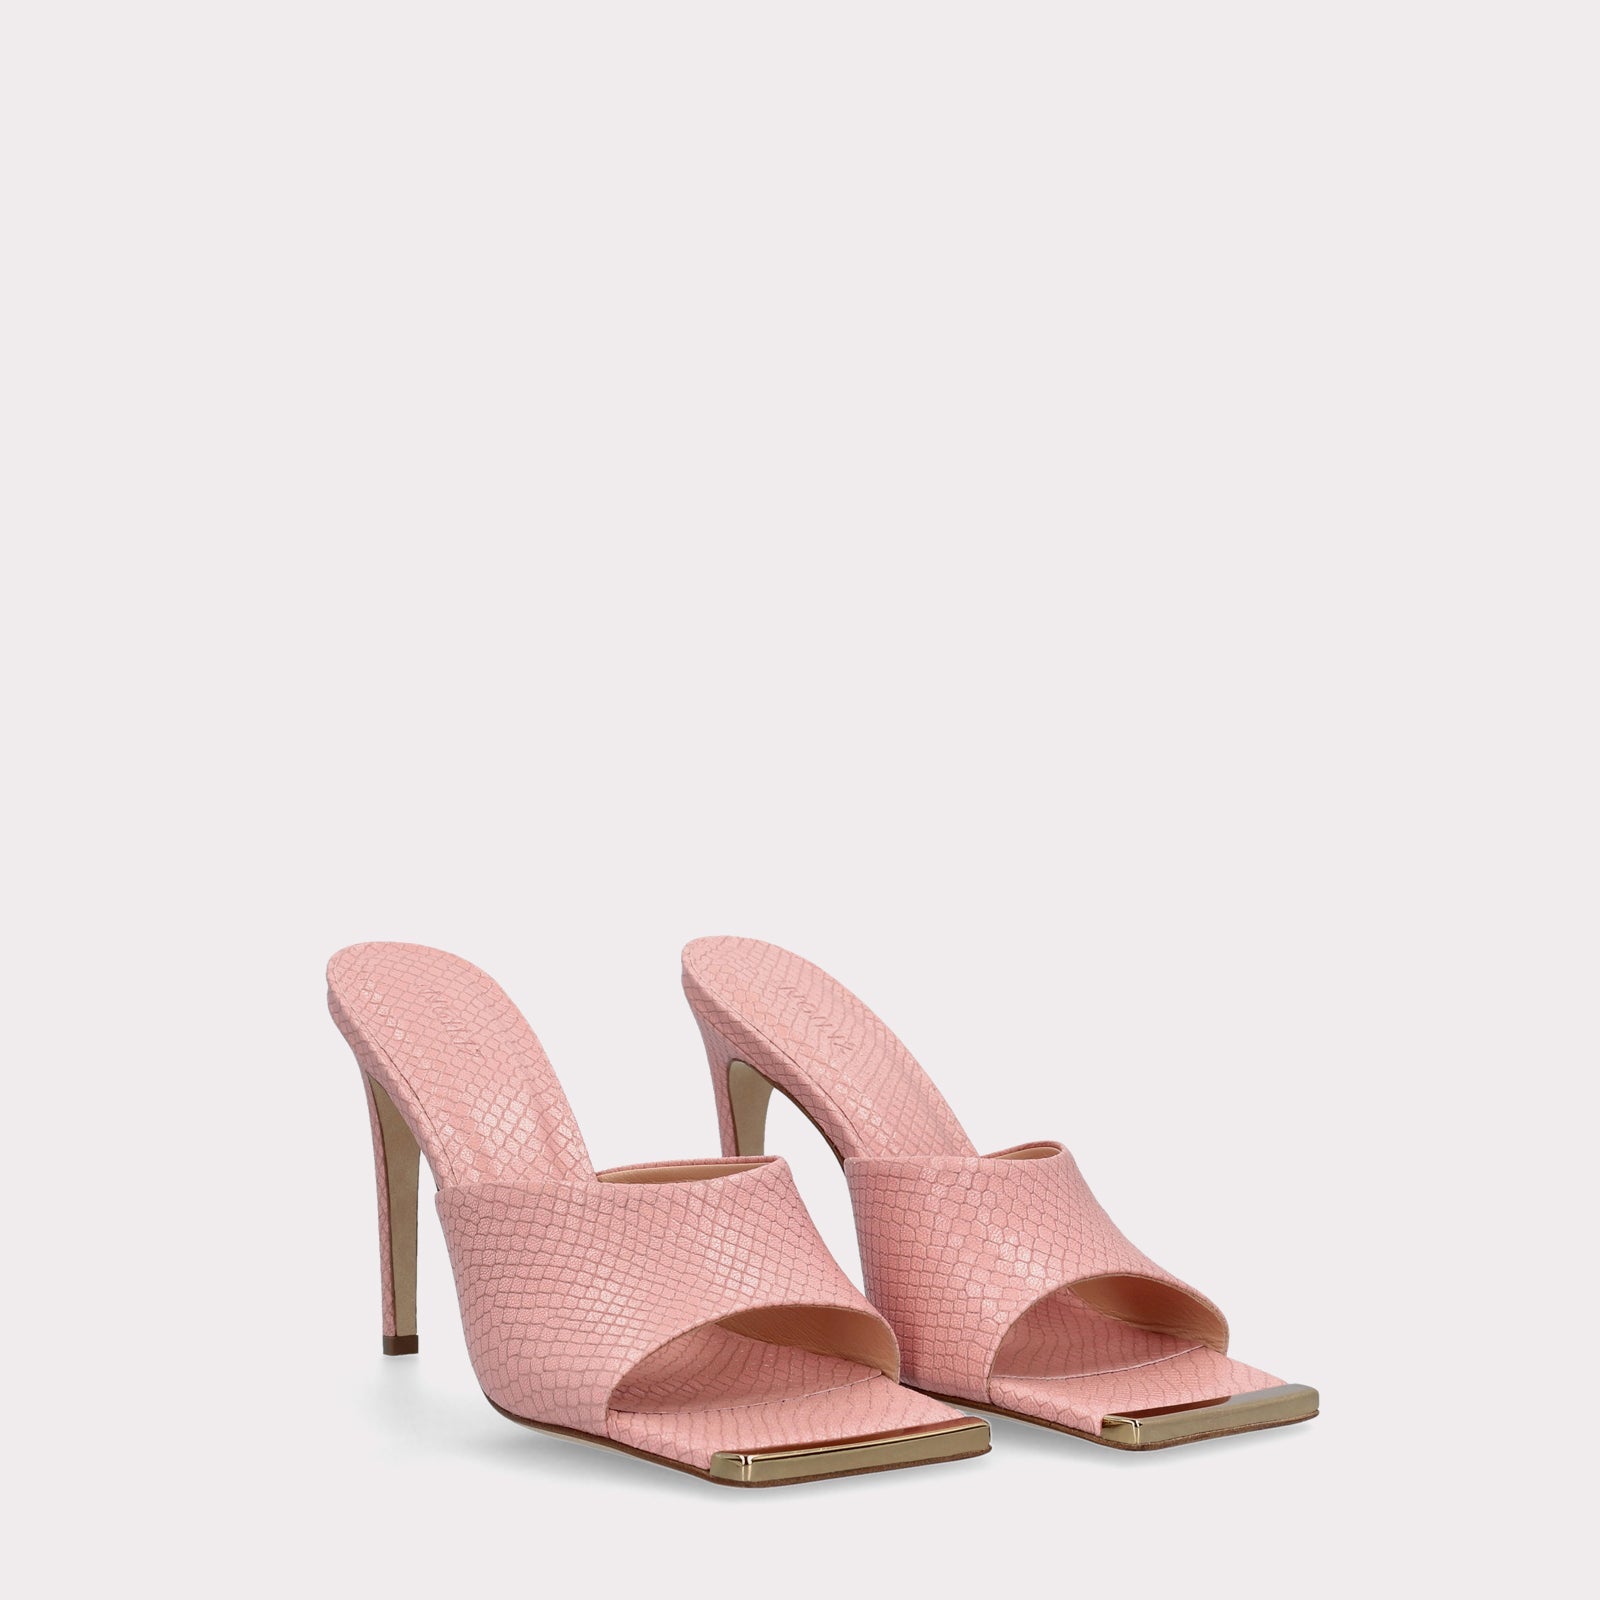 KALINA 05 PINK LIZZARD EMBOSSED LEATHER MULES